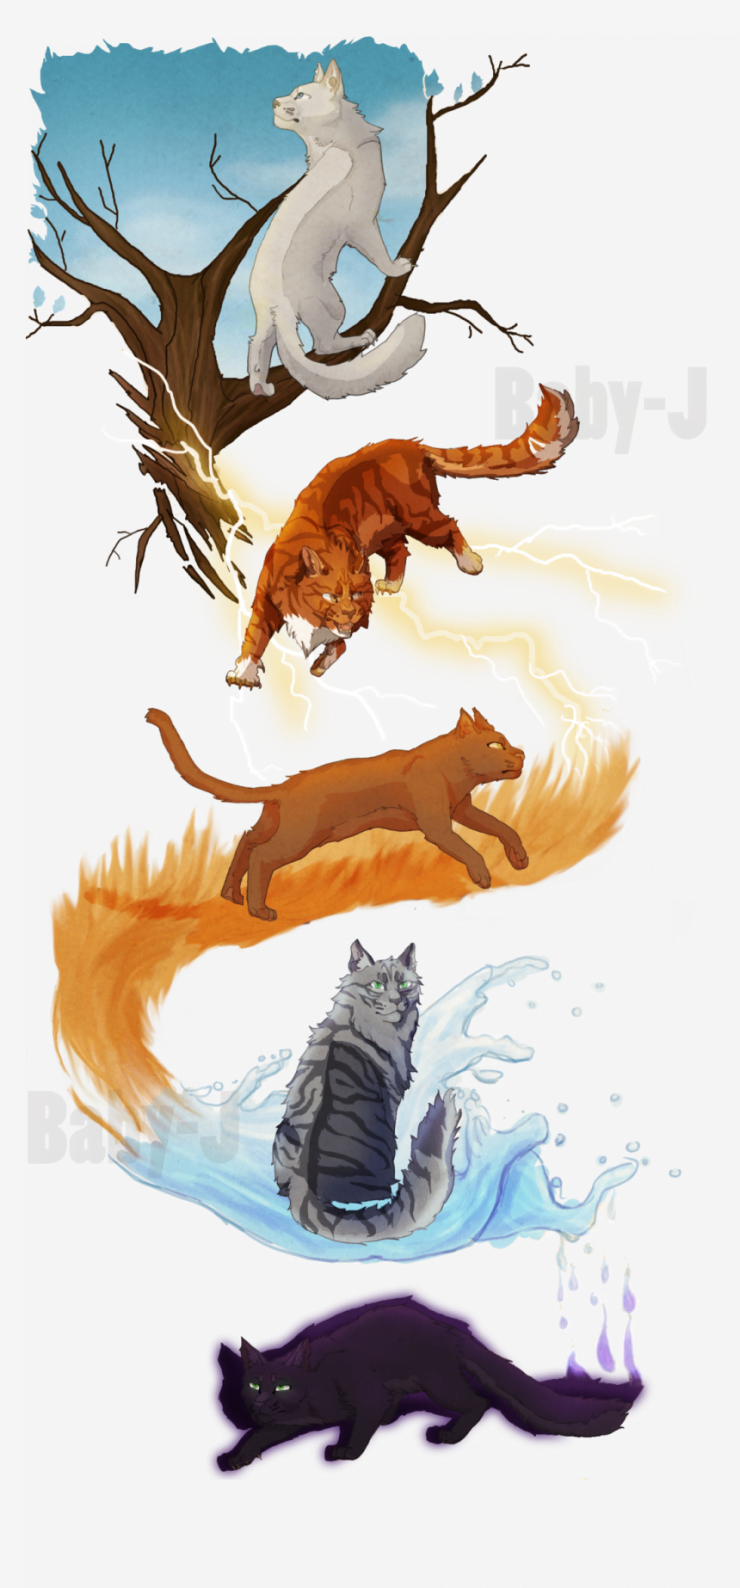 Cats of the Clans (Warriors Series)